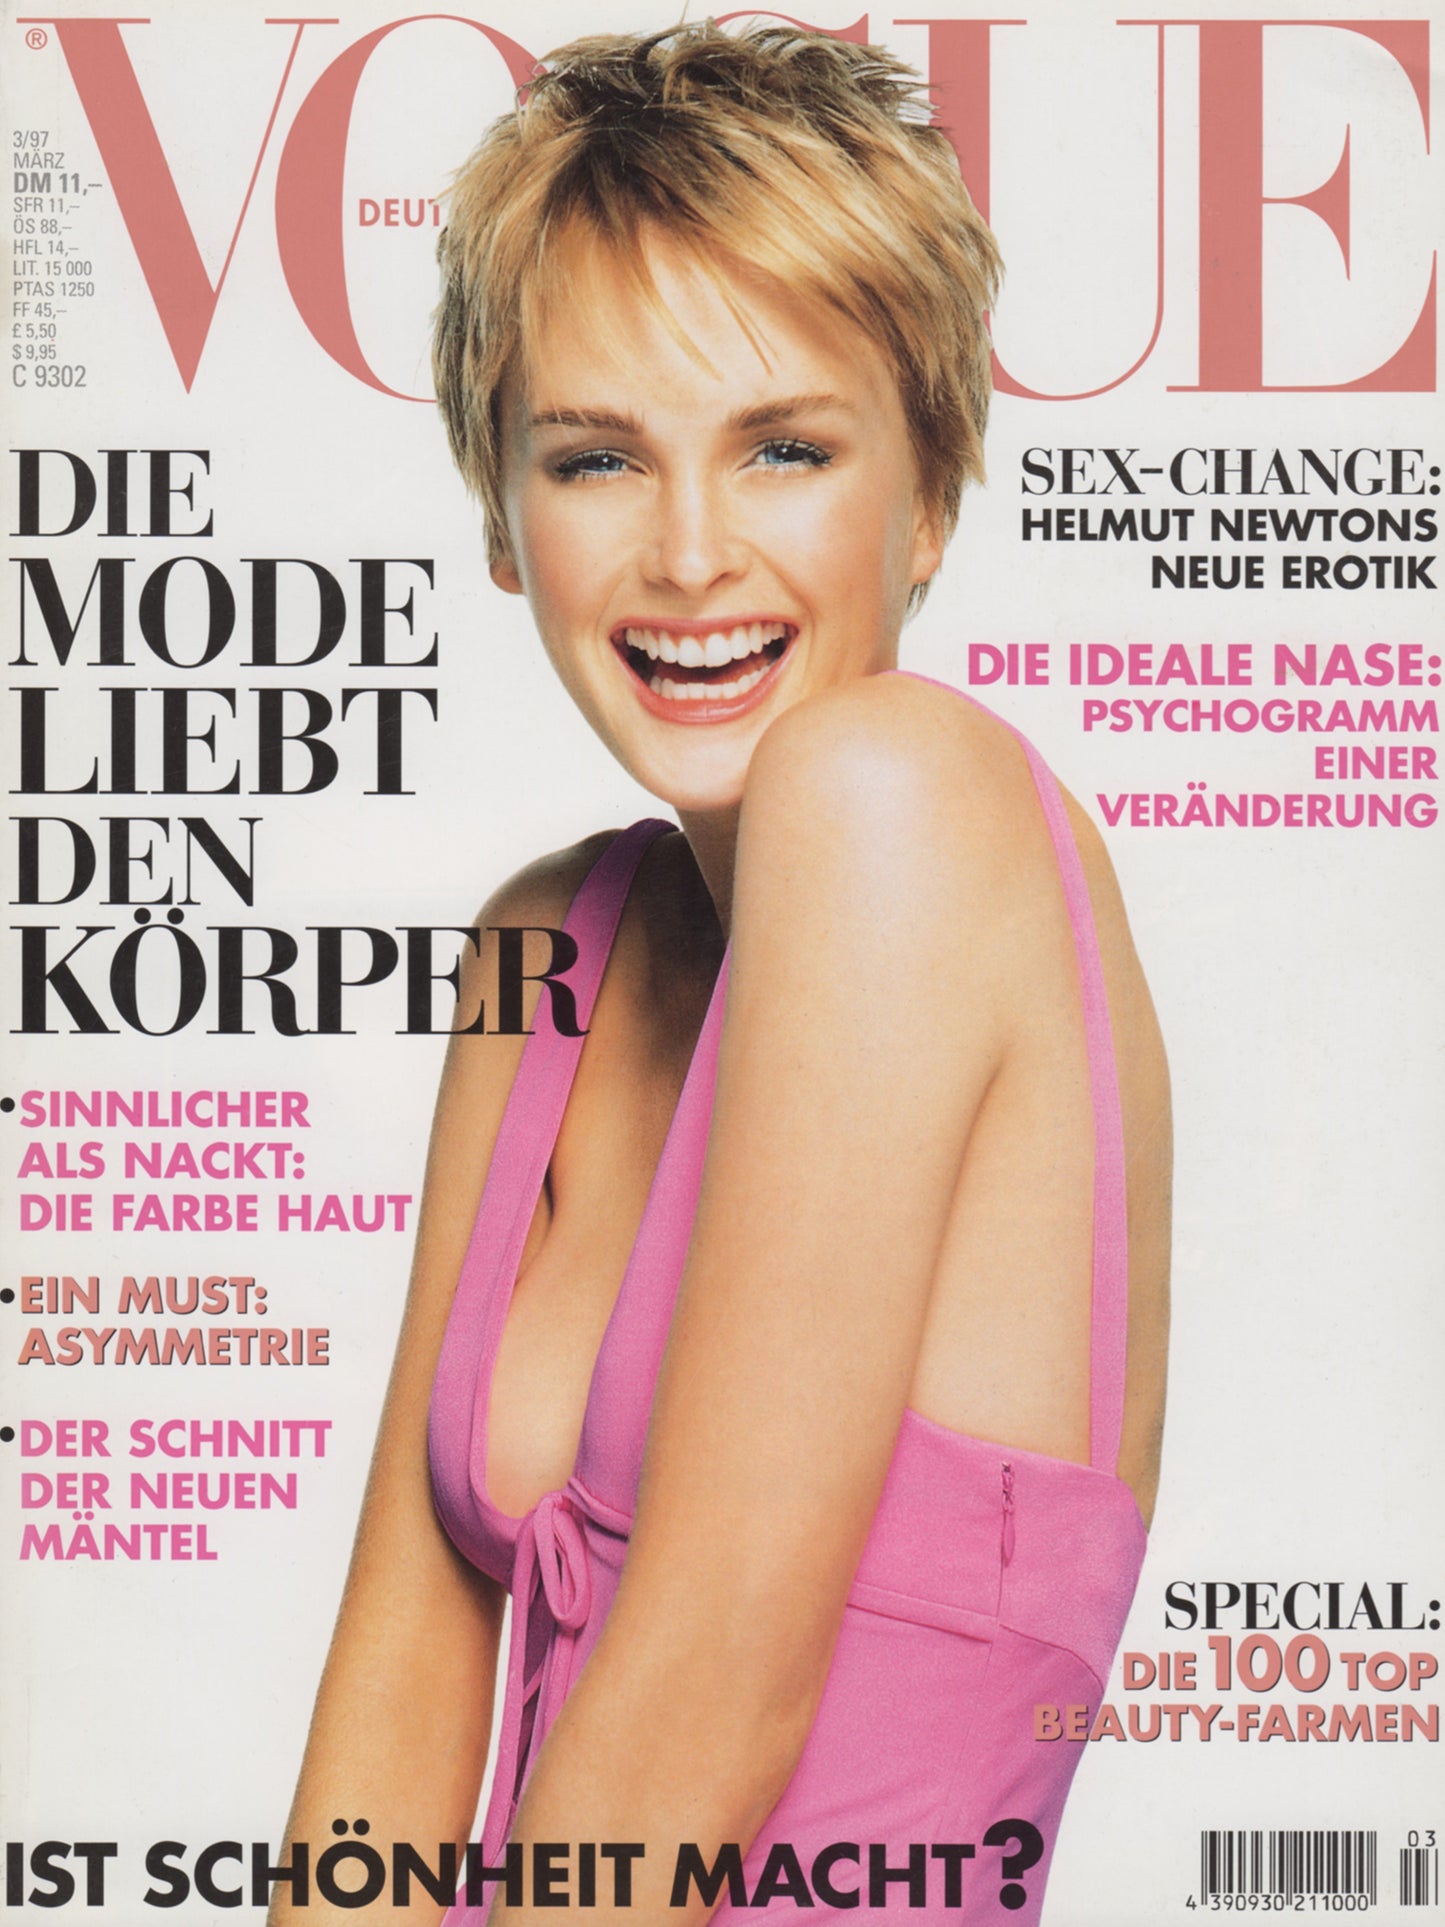 VOGUE GERMANY March 1997